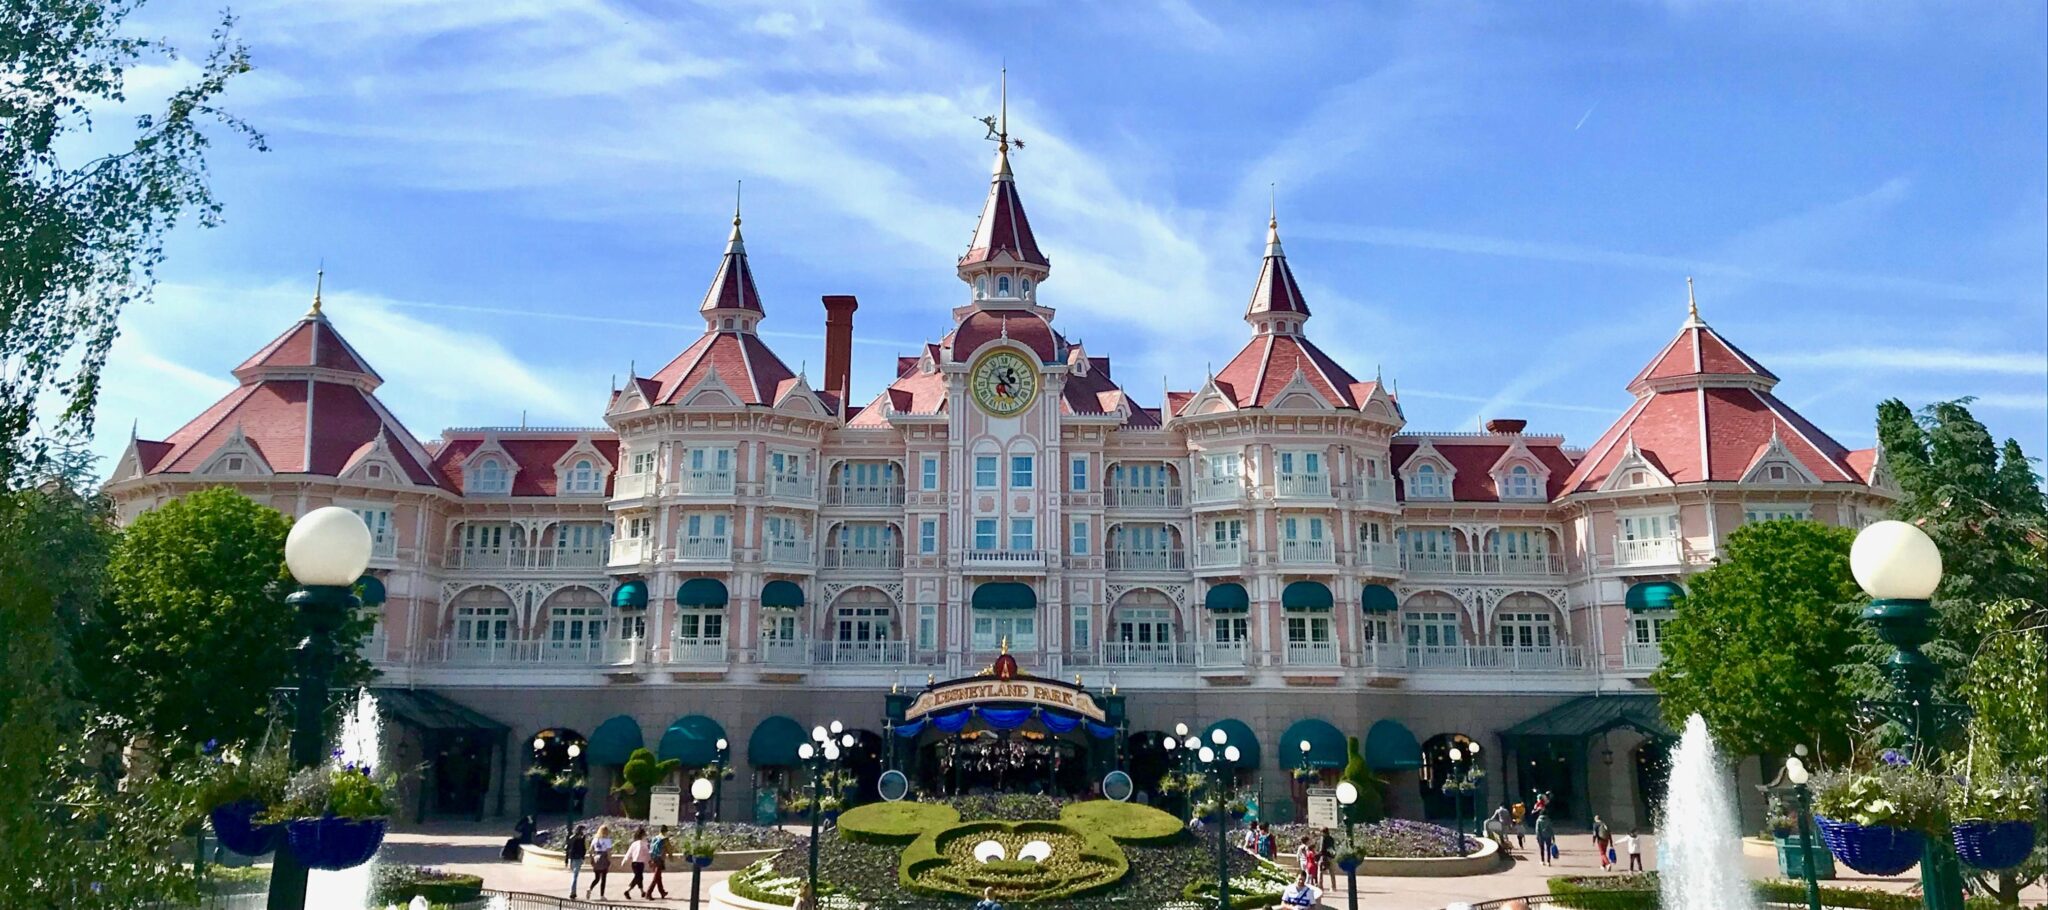 5 Reasons Why You Should Stay In A Disney Hotel In Disneyland Paris